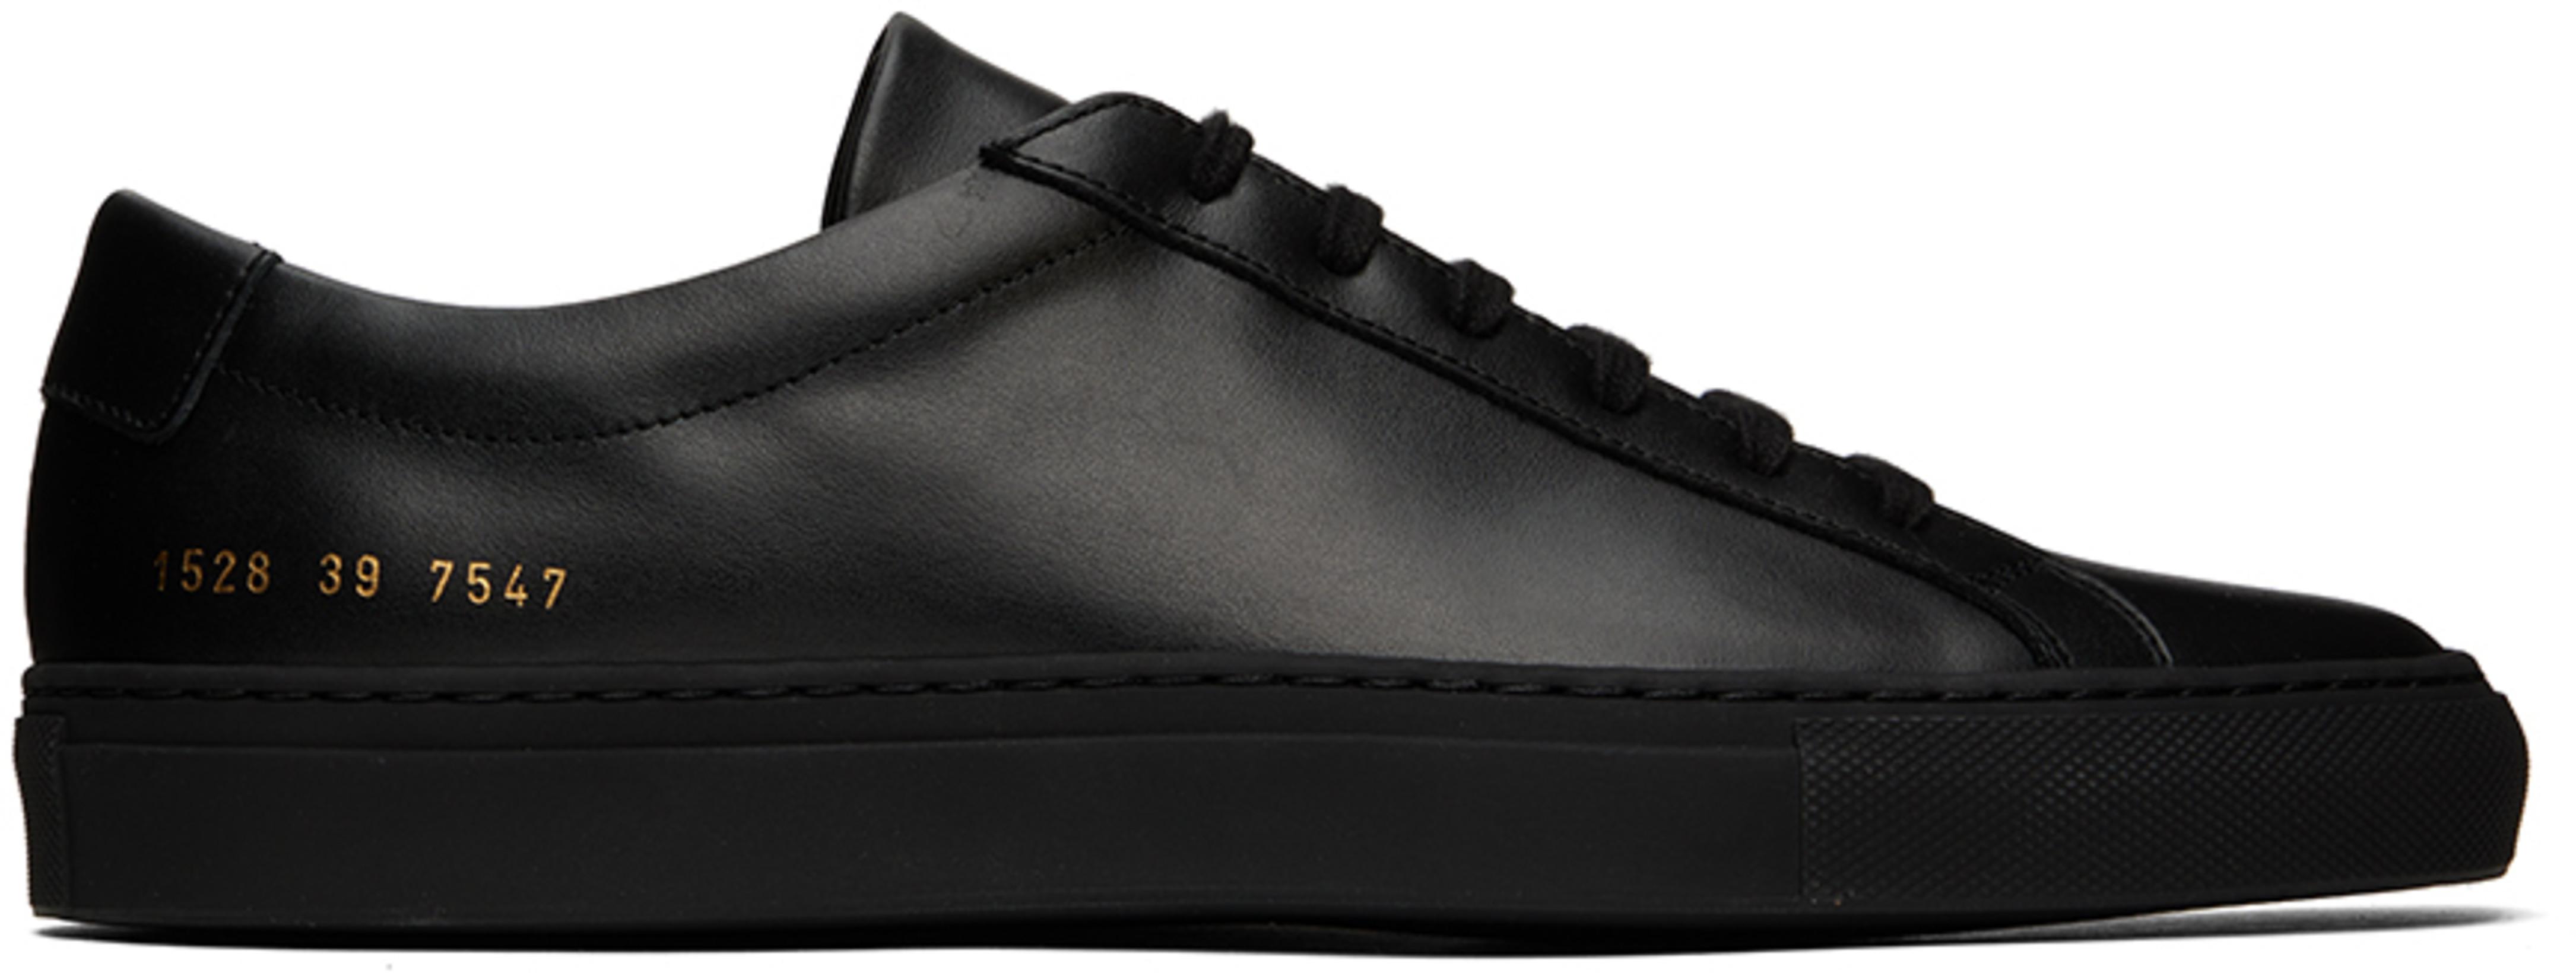 Black Original Achilles Low Sneakers by COMMON PROJECTS